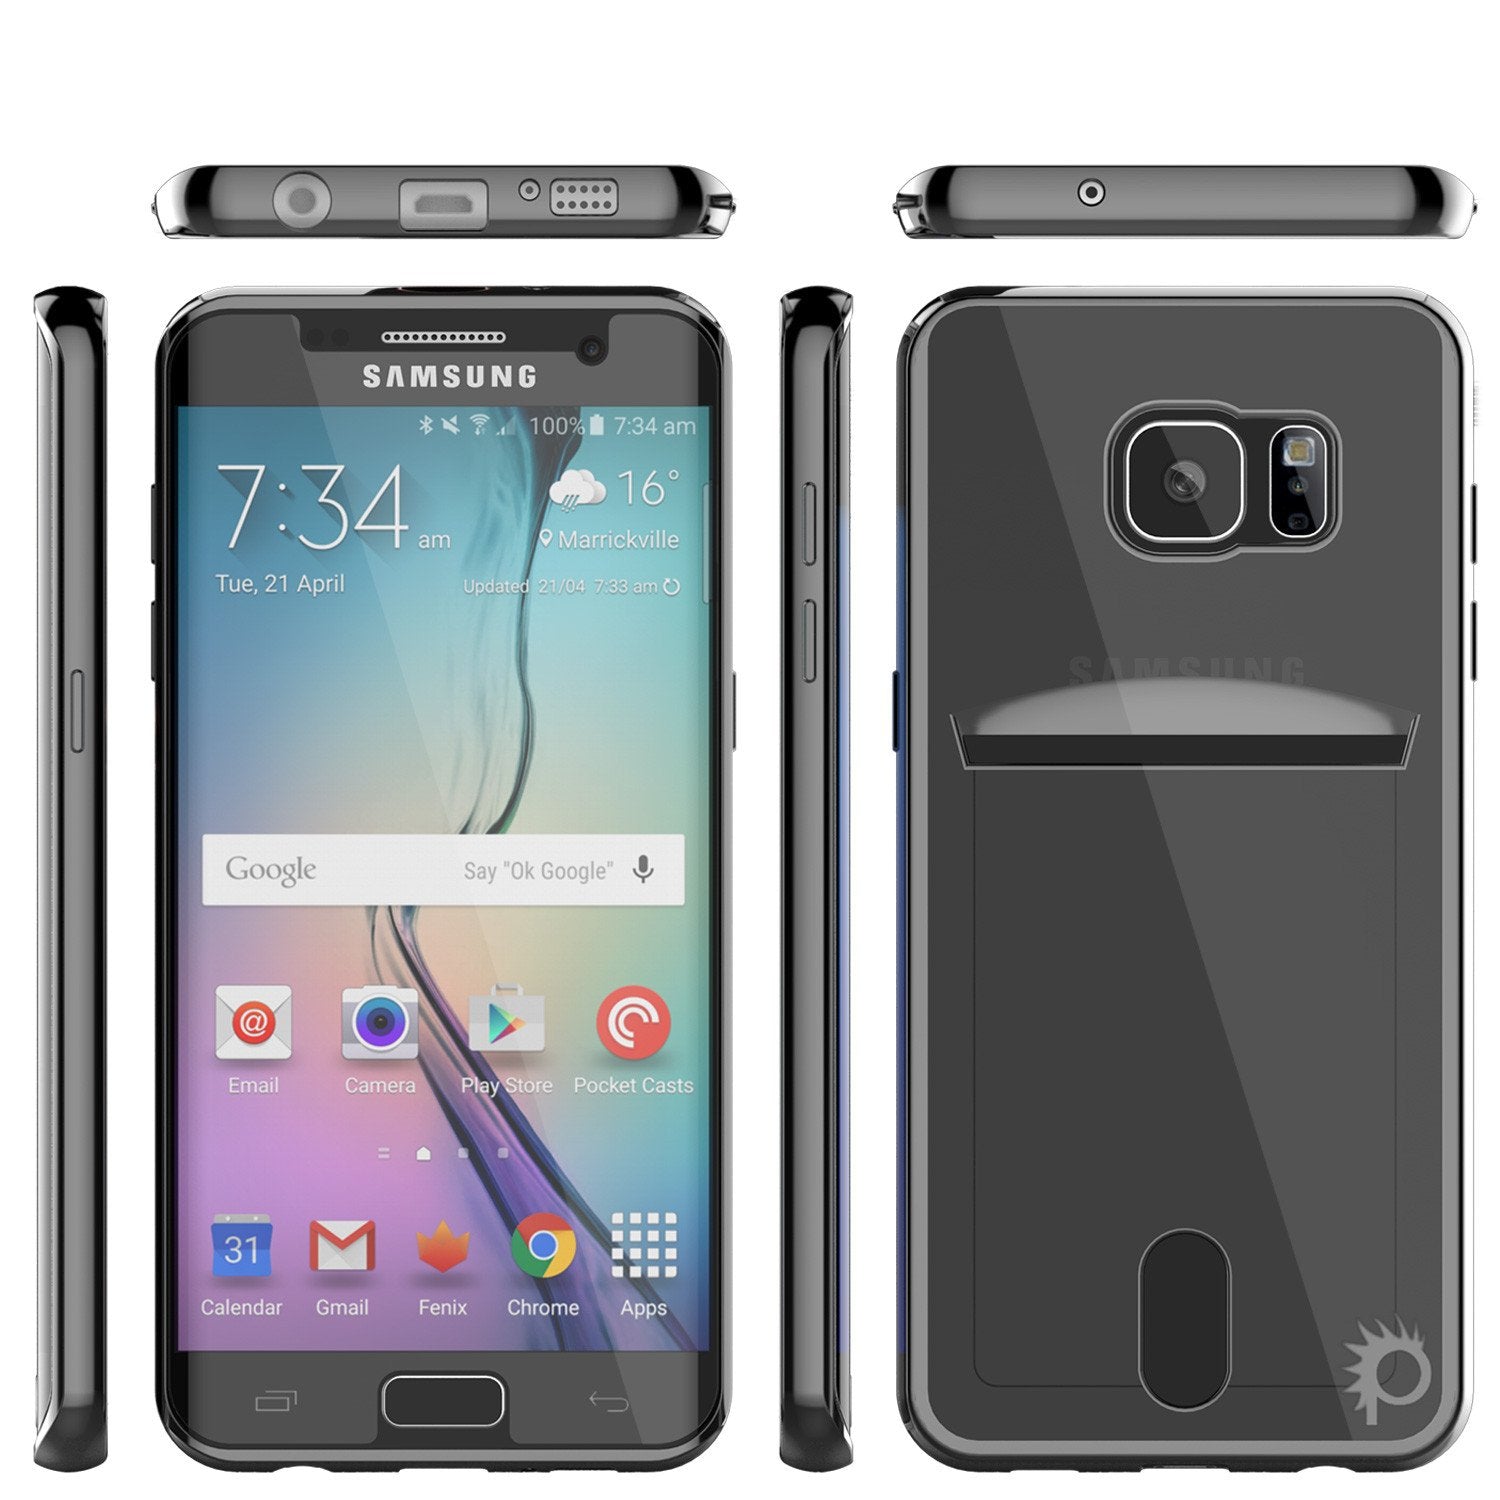 Galaxy S6 EDGE Case, PUNKCASE® LUCID Black Series | Card Slot | SHIELD Screen Protector | Ultra fit - PunkCase NZ